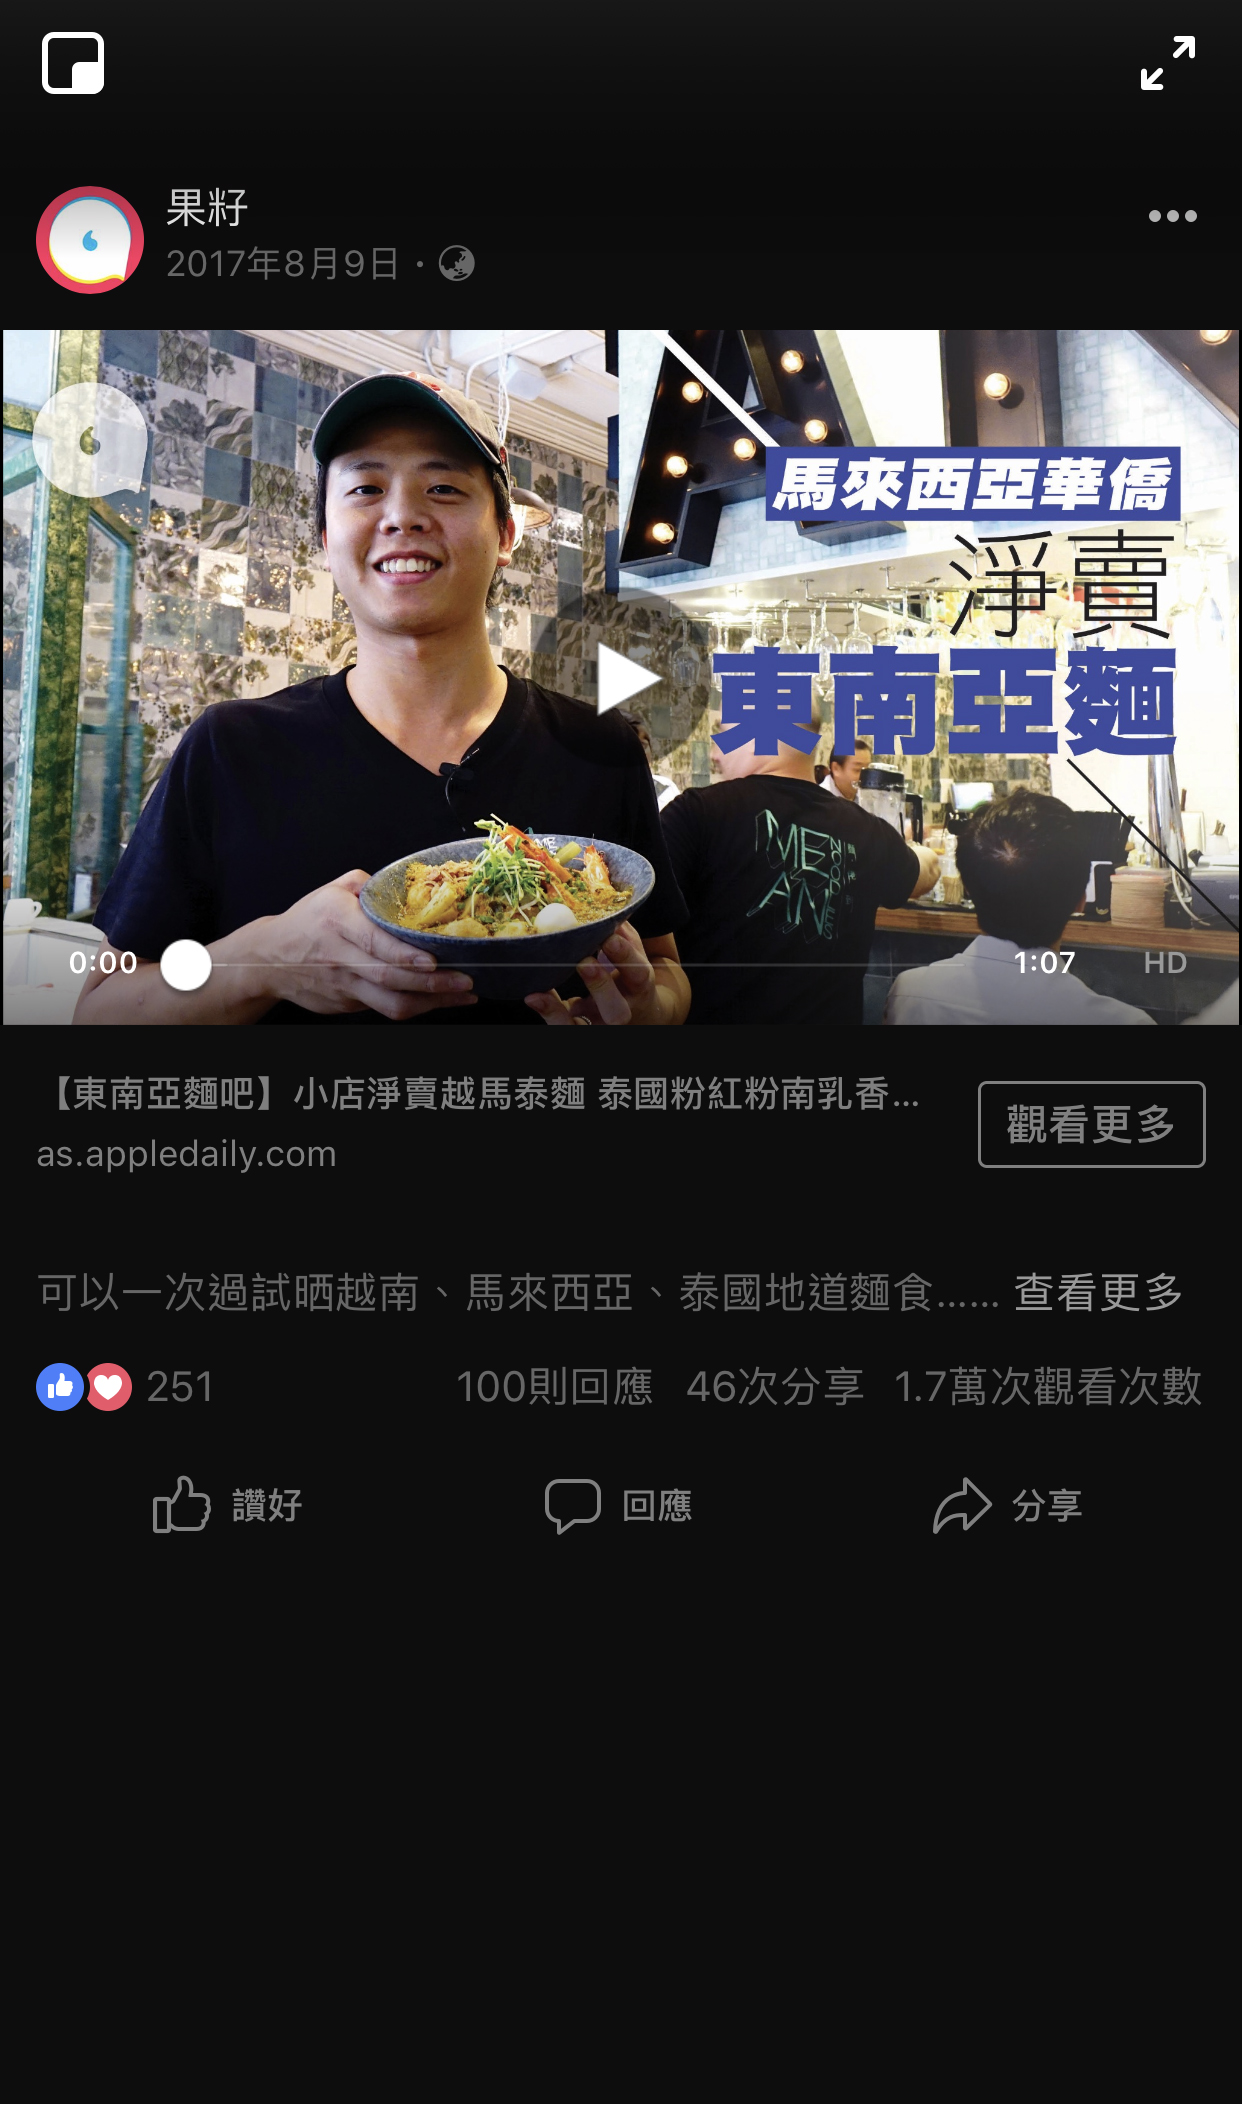 Mean Noodles on Apple Daily 果籽